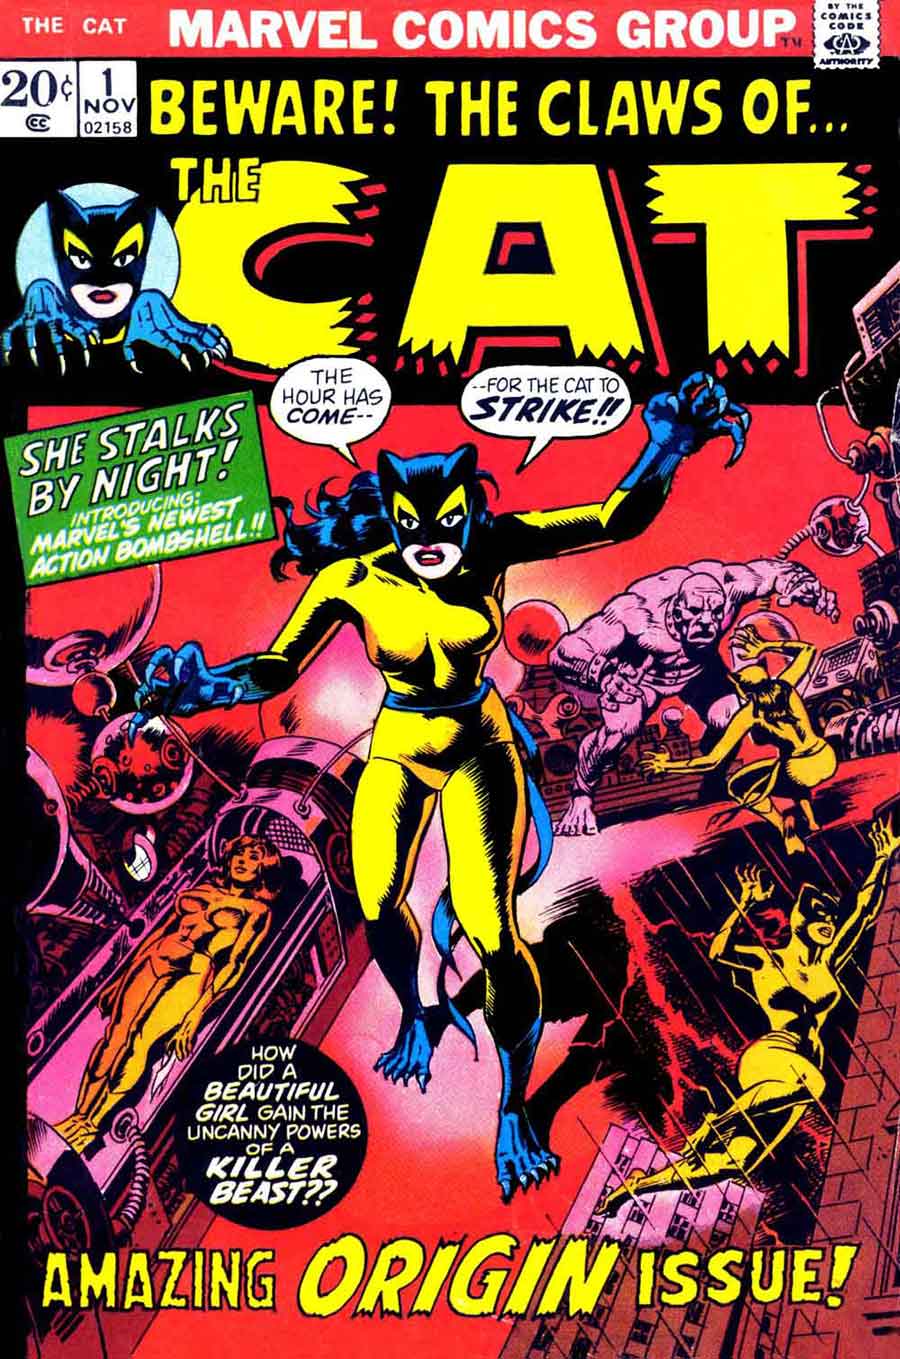 The Cat #1 Wally Wood marvel key issue 1970s bronze age comic book cover - 1st appearance